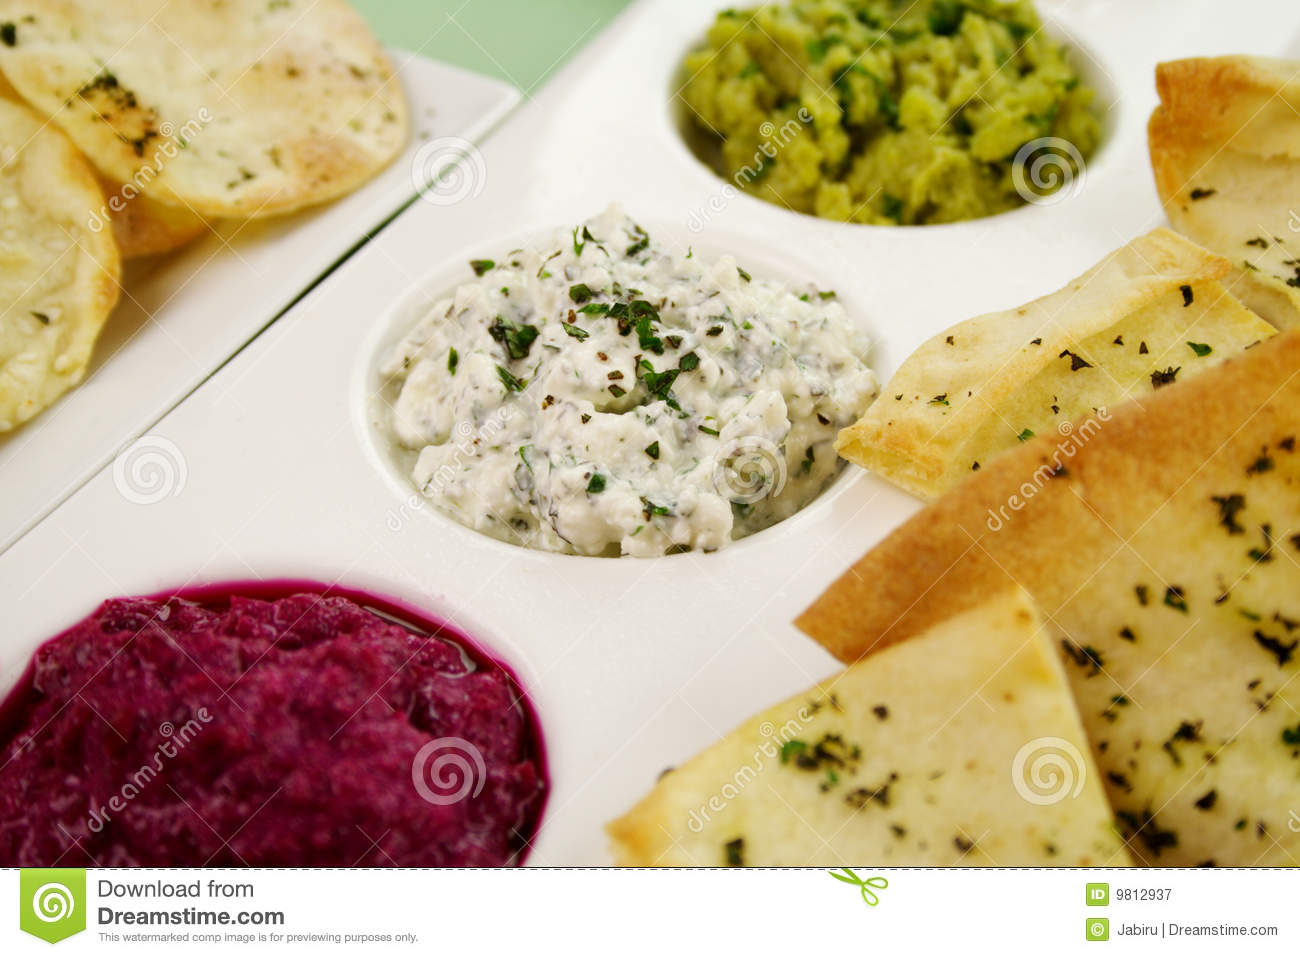 Assorted Dips Of Cottage Cheese And Herbs Pea And Basil With Pita